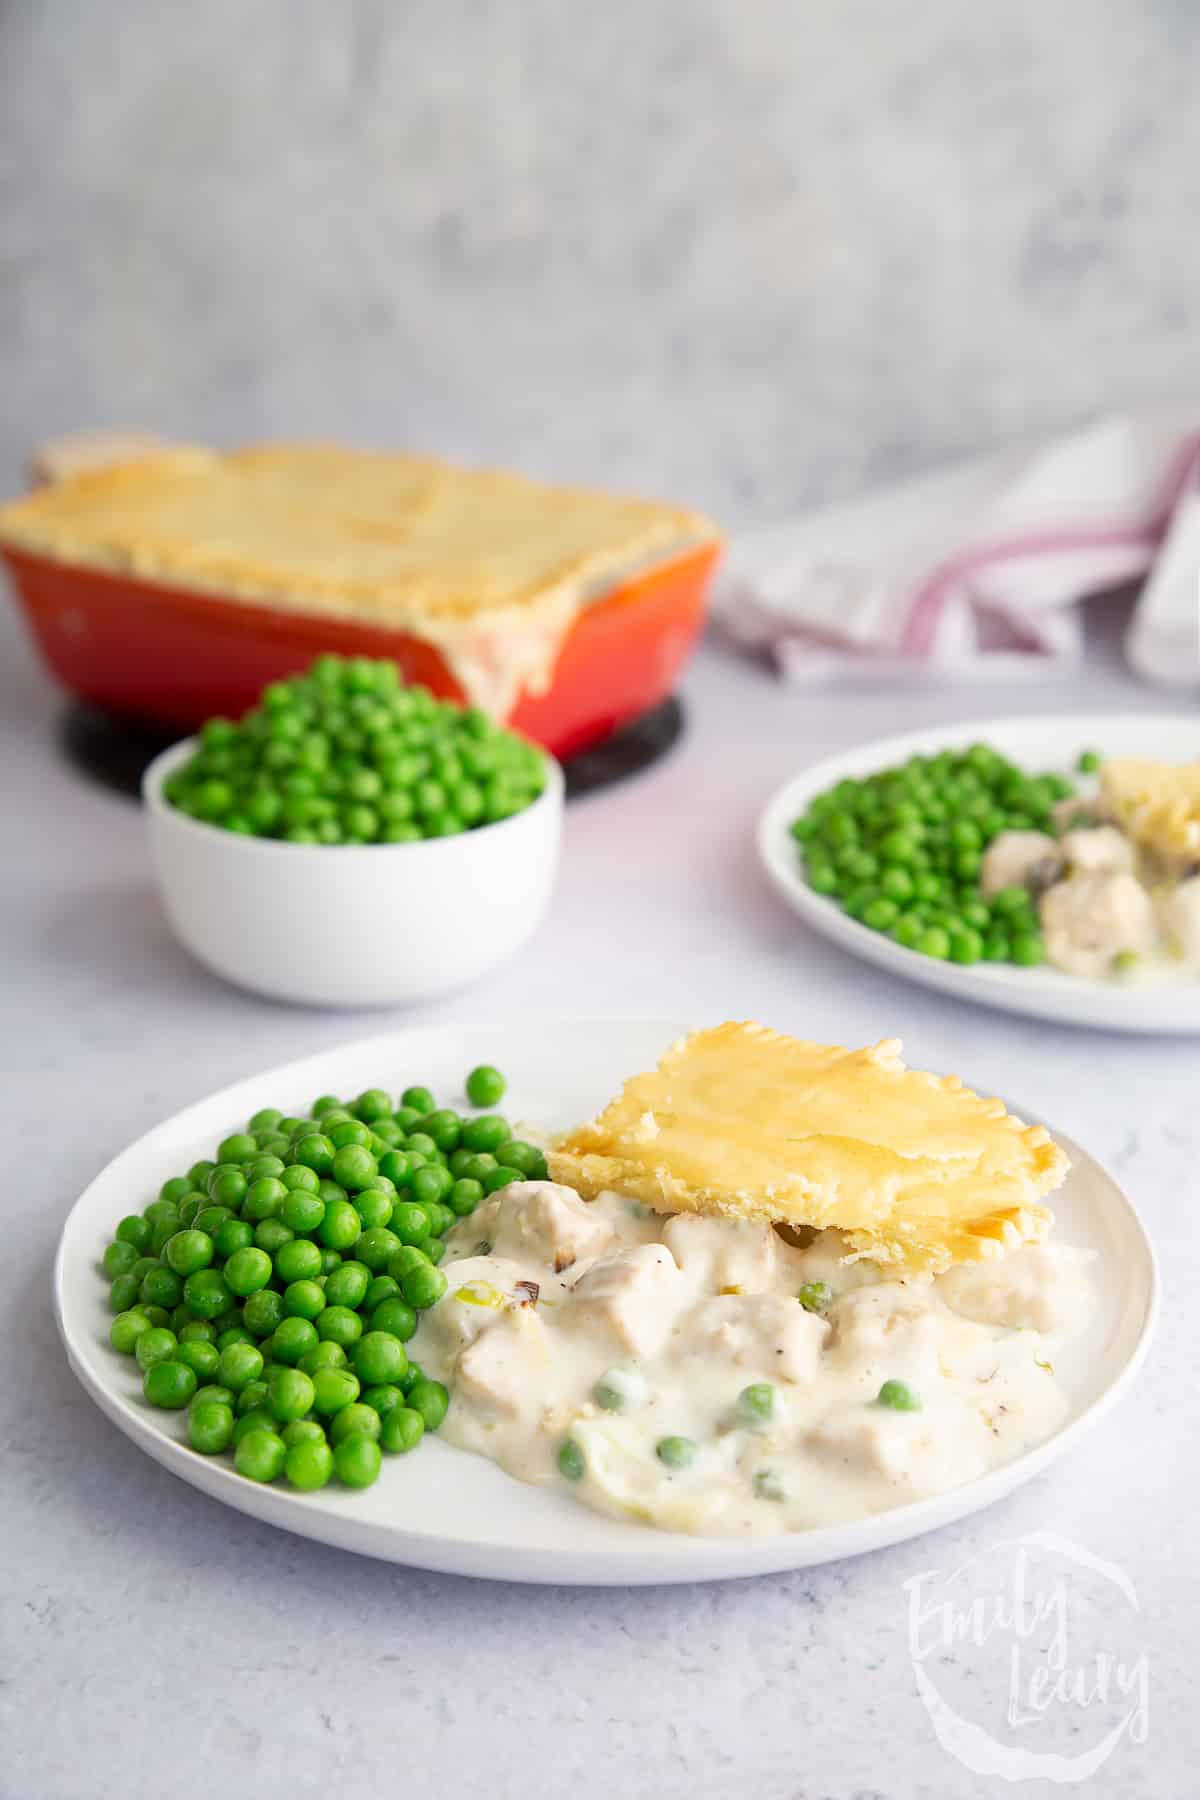 a piece of Gluten free vegetarian pie on a white plate with garden peas on the side.